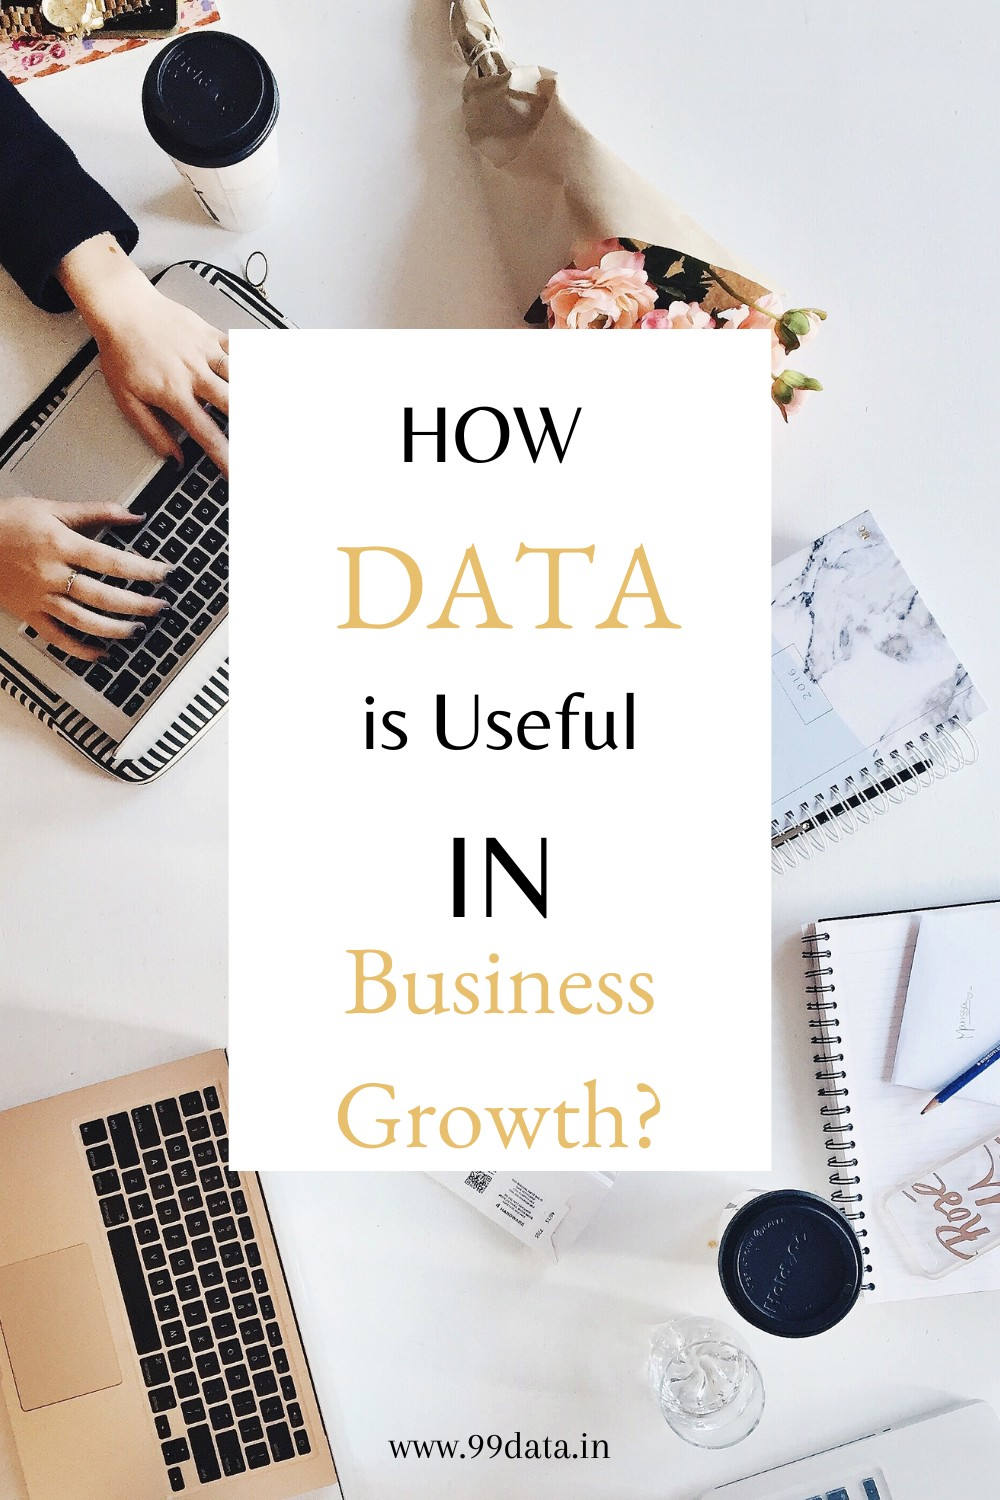 HOW DATA IS USEFUL IN BUSINESS GROWTH?